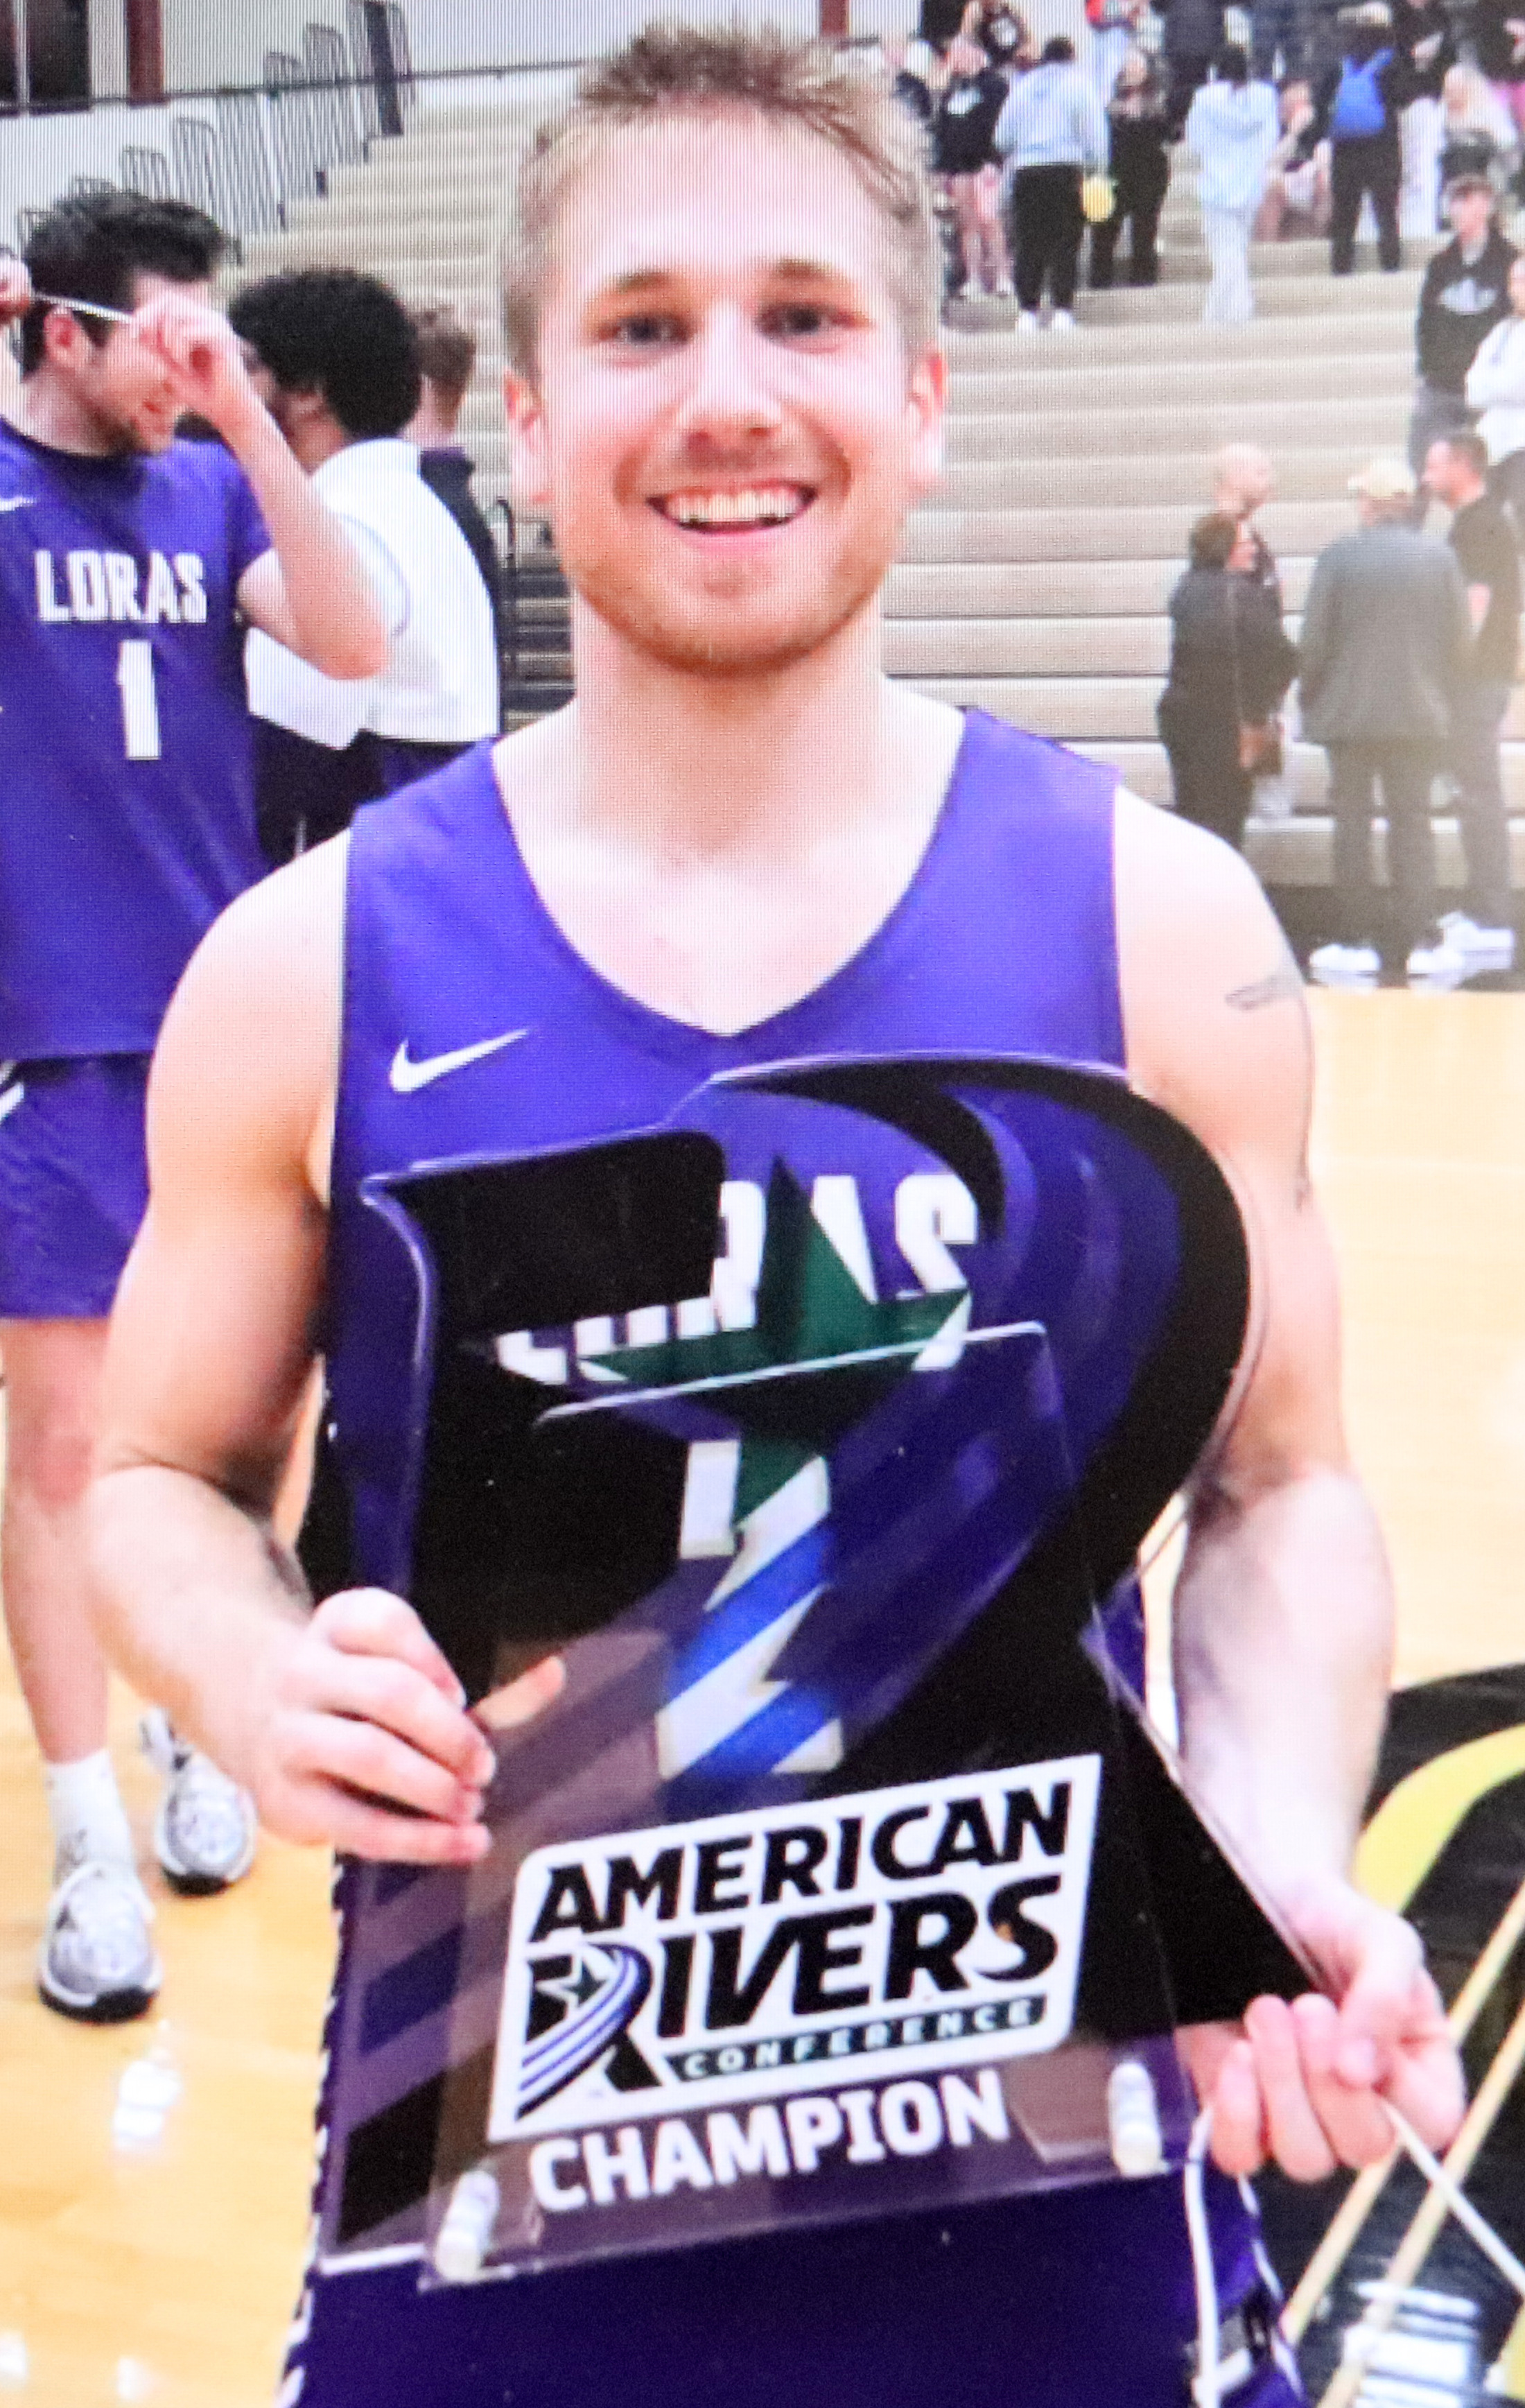 Jackson Molstead scores 19 while helping DuHawks win American Rivers Conference tourney title